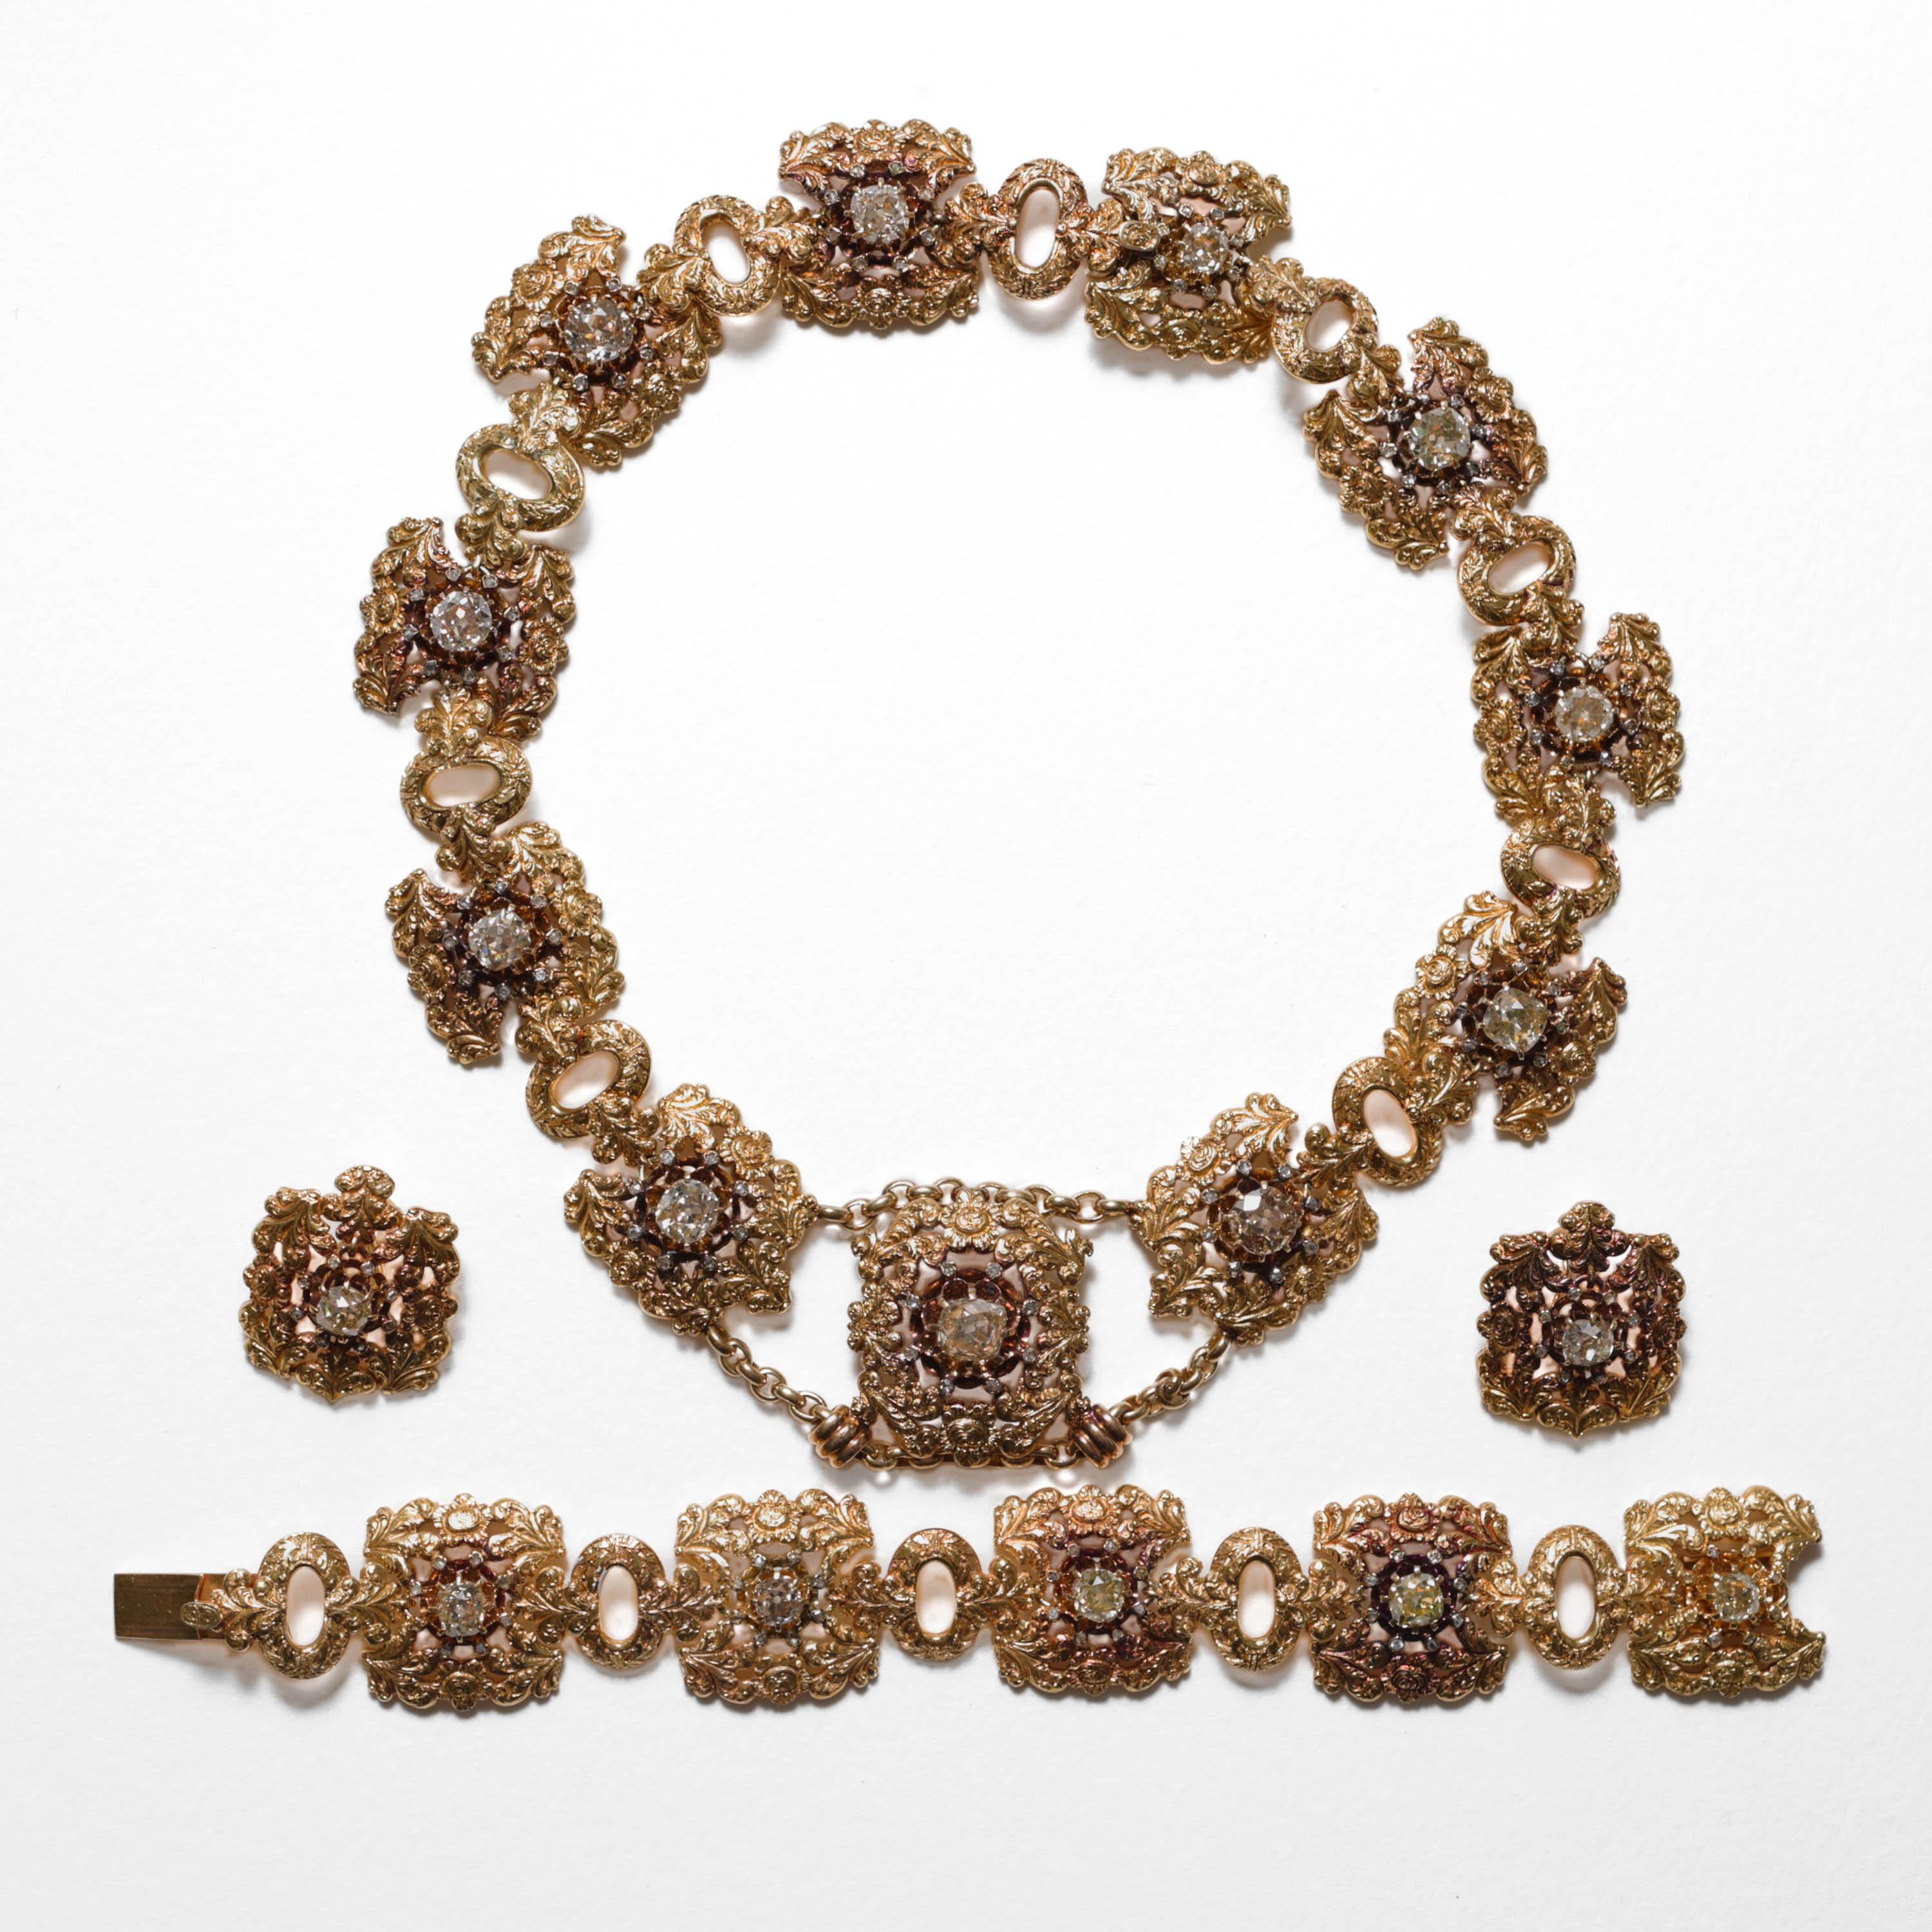 Free your inner maximalist with this extraordinary one-of-a-kind suit of jewels created by Mario Buccellati's own hands.

Complete parures created by the iconic Italian master goldsmith Mario Buccellati himself are so rare, I have never seen another